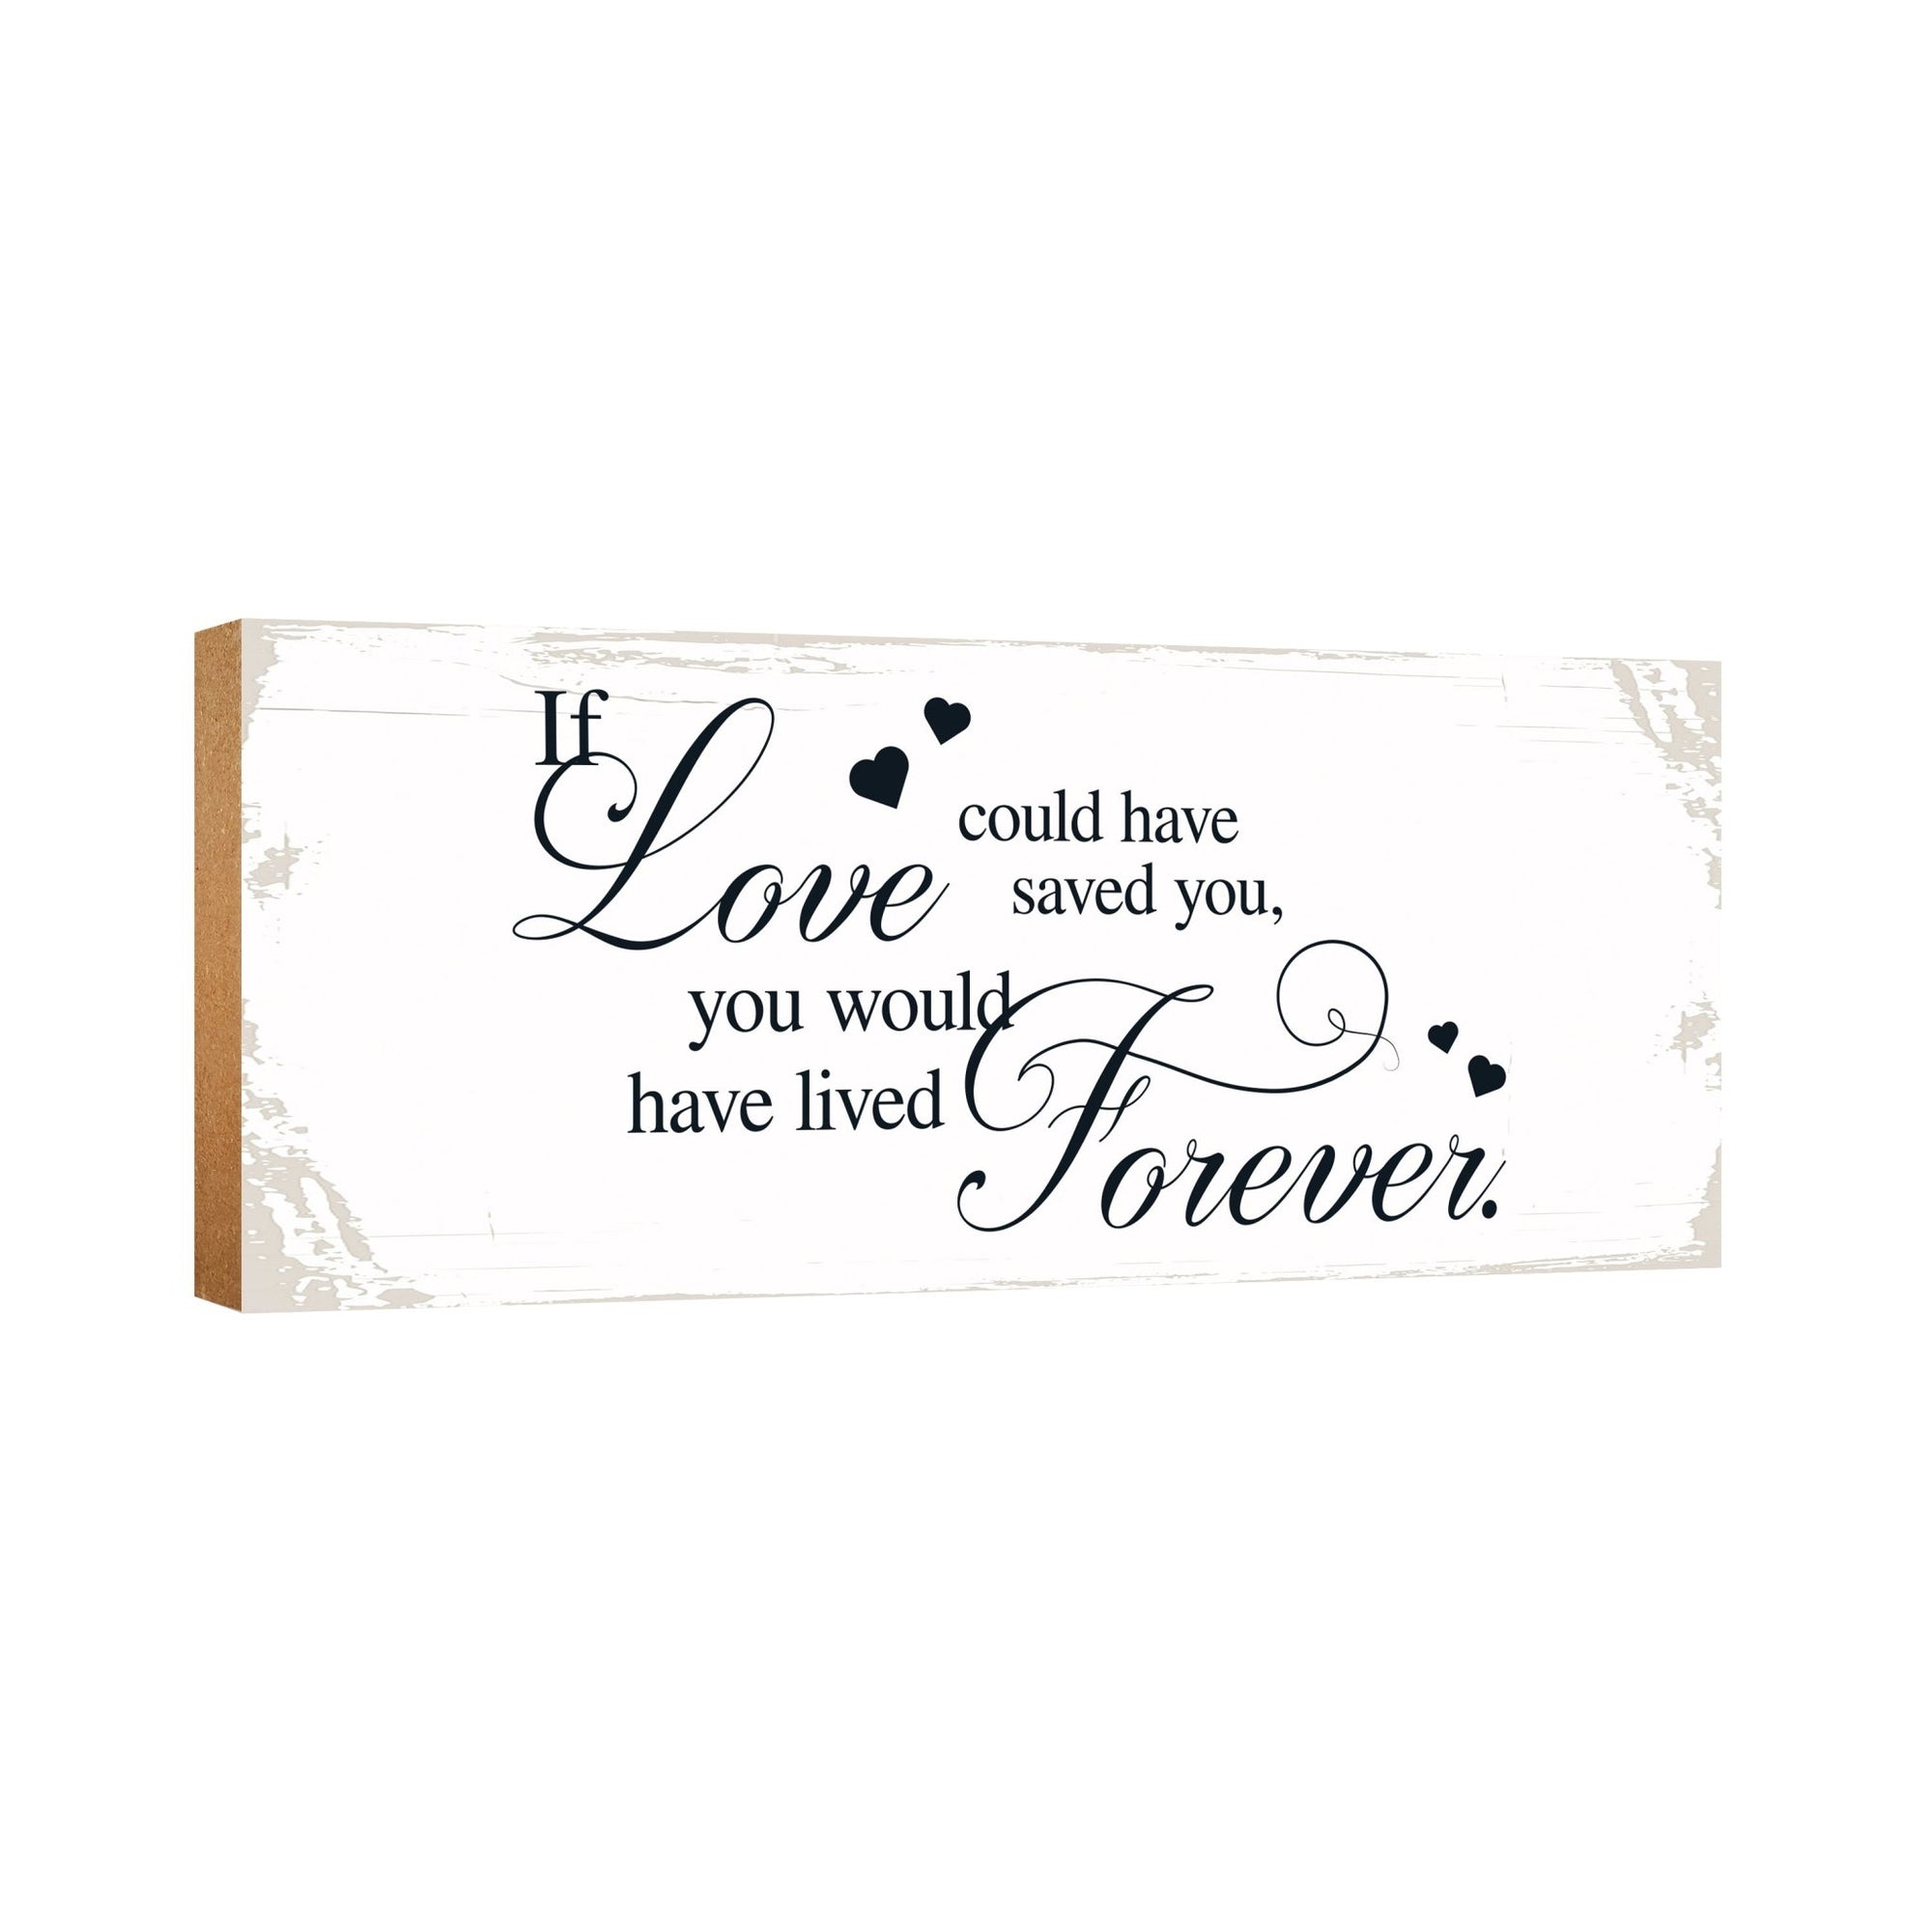 Modern Inspirational Pet Memorial 4x10 inches Wooden Sign (If Loved Could Saved) Tabletop Plaque Home Decoration Loss of Pet Bereavement Sympathy Keepsake - LifeSong Milestones